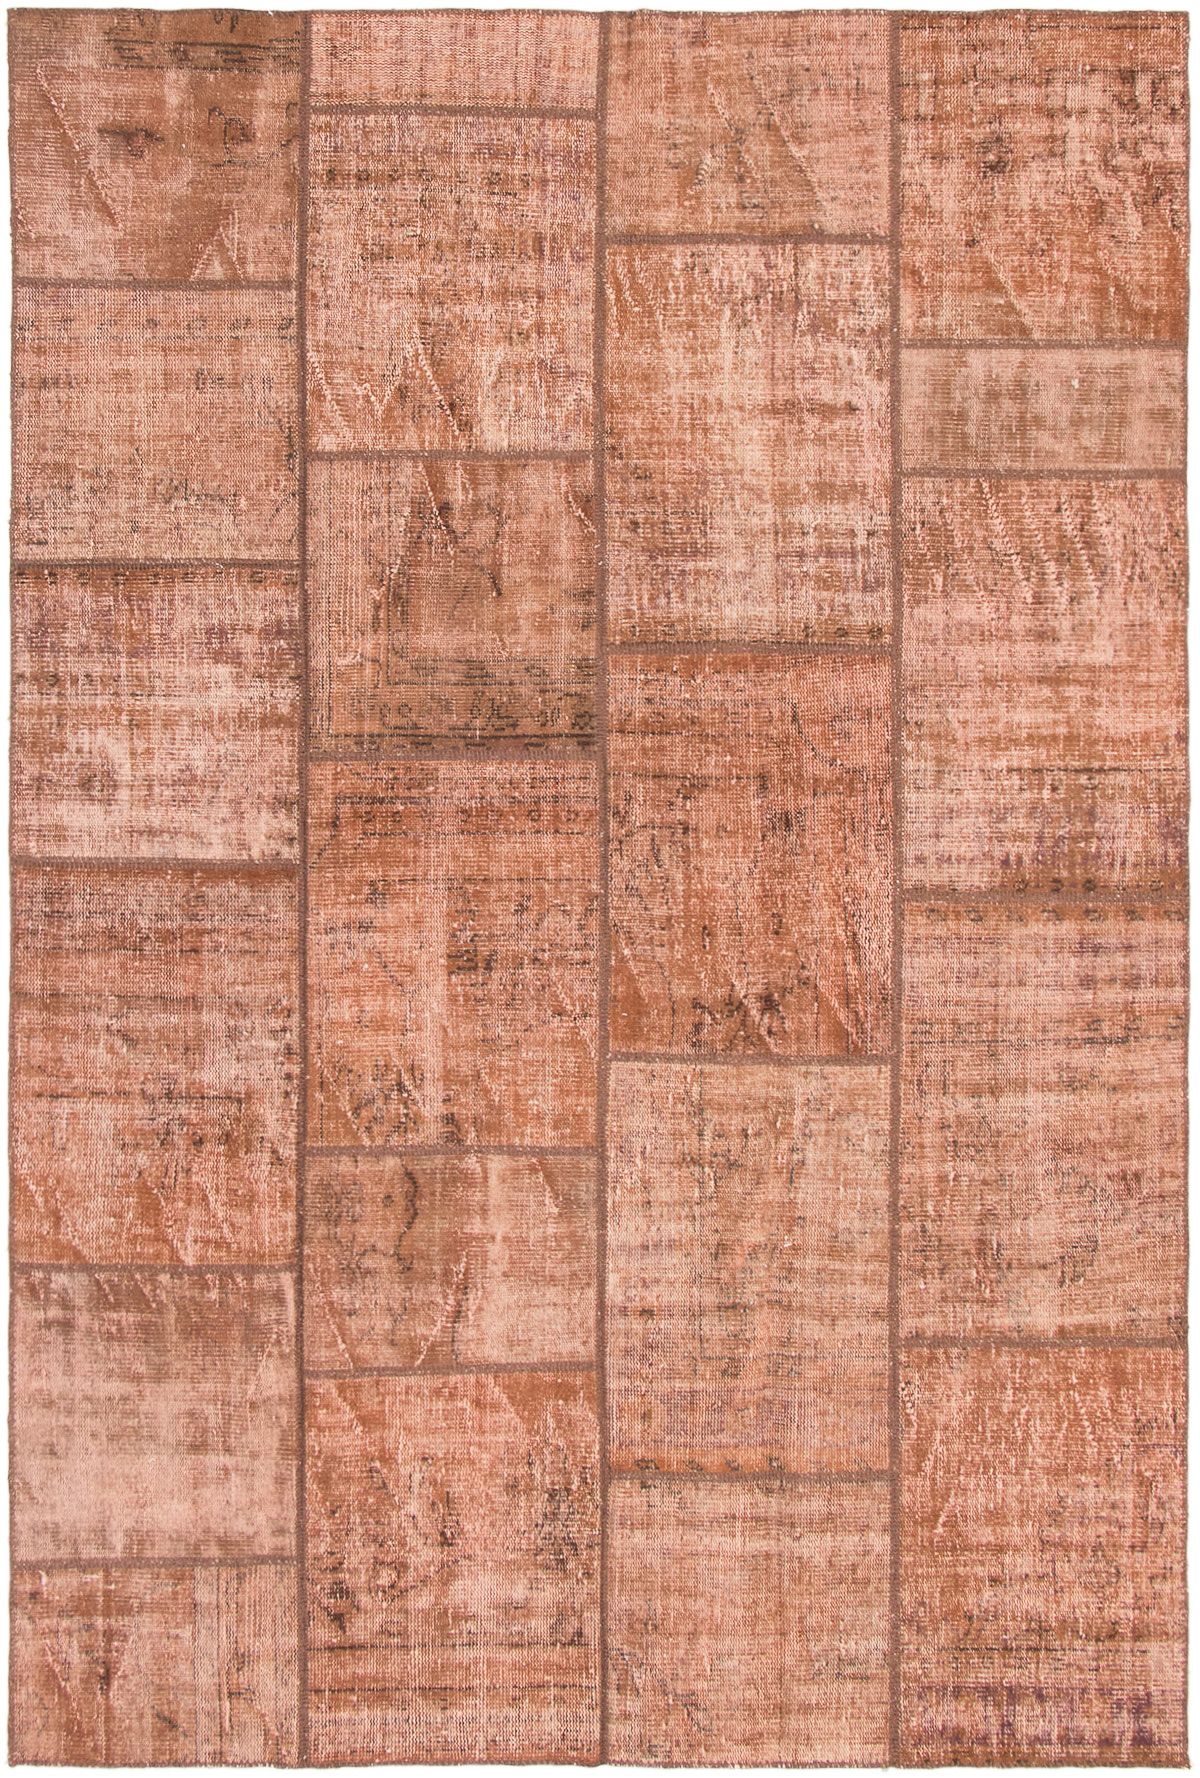 Hand-knotted Color Transition Patch Brown Wool Rug 6'10" x 10'0"  Size: 6'10" x 10'0"  